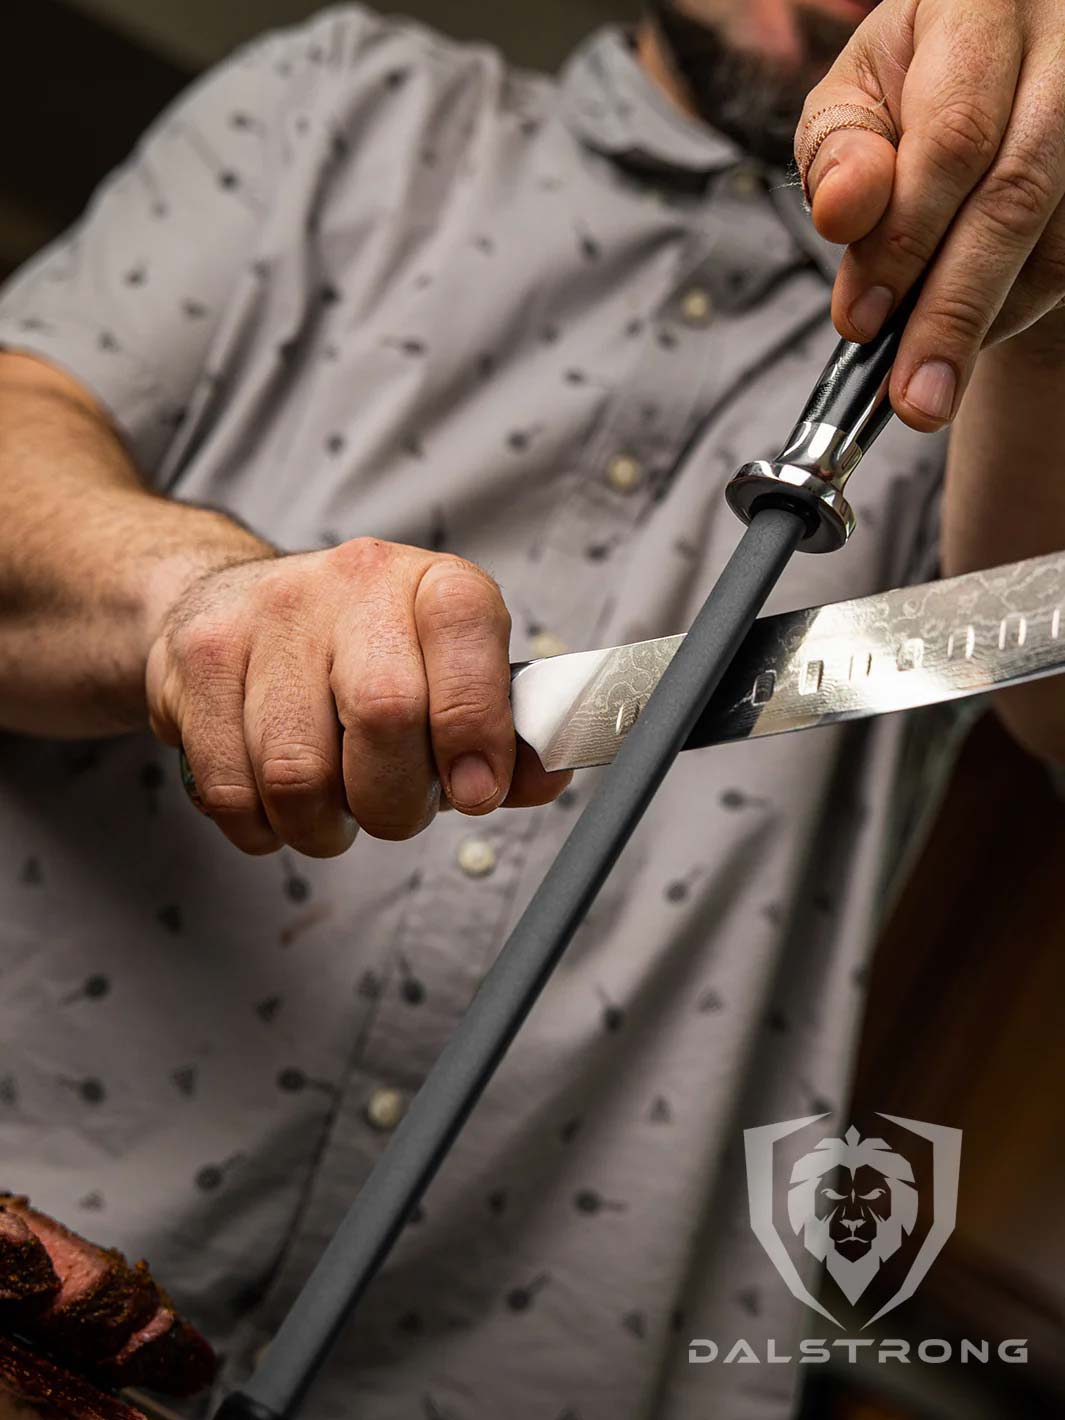 A man sharpening a knife using the Dalstrong 10 inch honing rod with ceramic coating.